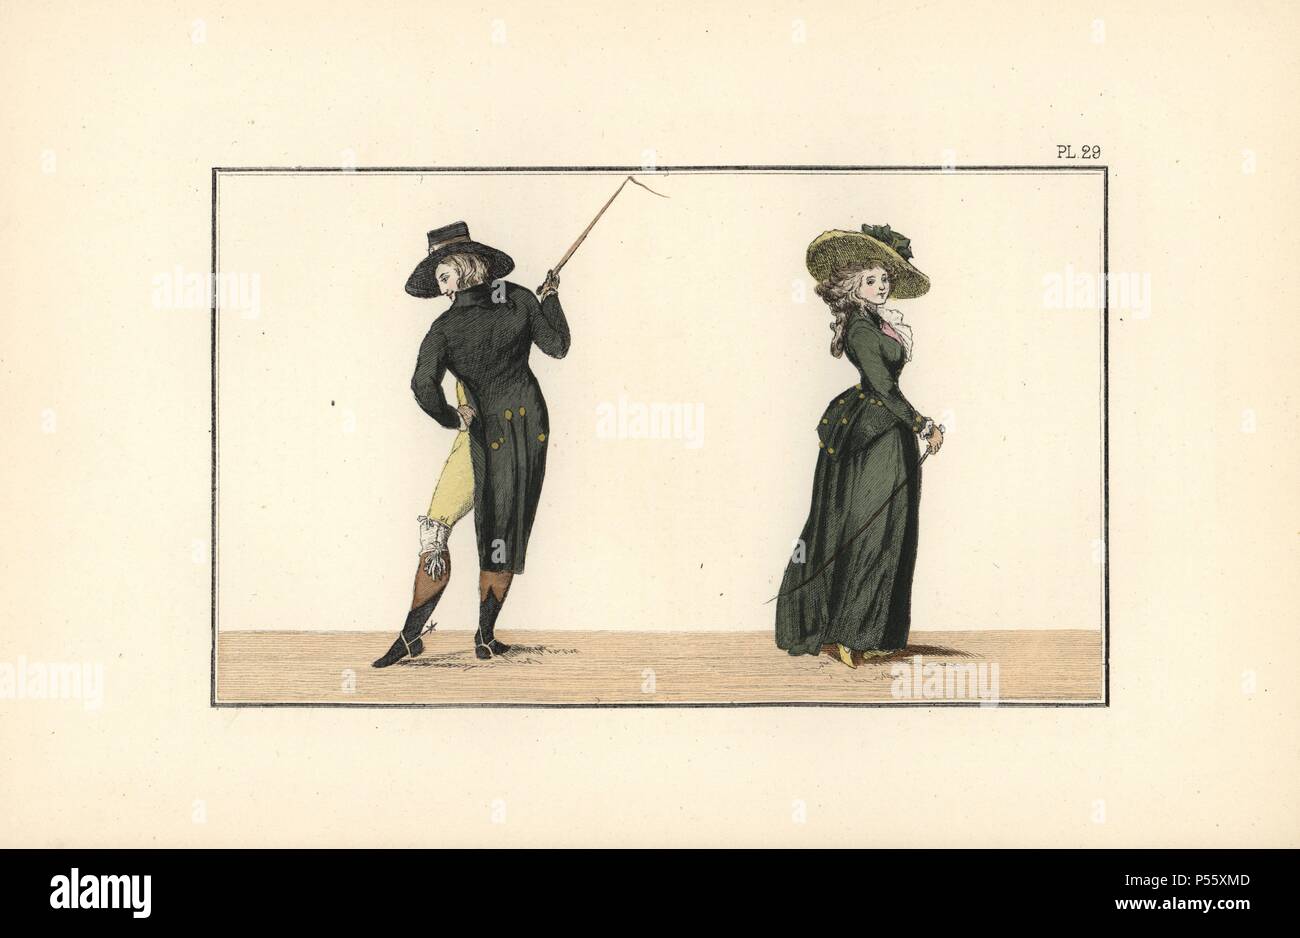 Woman in bottle-green petticoat and felt hat. Man in riding coat of the colour of London-chimney soot.. Hand-colored lithograph from 'Fashions and Customs of Marie Antoinette and her Times,' by Le Comte de Reiset, Paris, 1885. The journal of Madame Eloffe, dressmaker and linen-merchant to the Queen and ladies of the court. Stock Photo